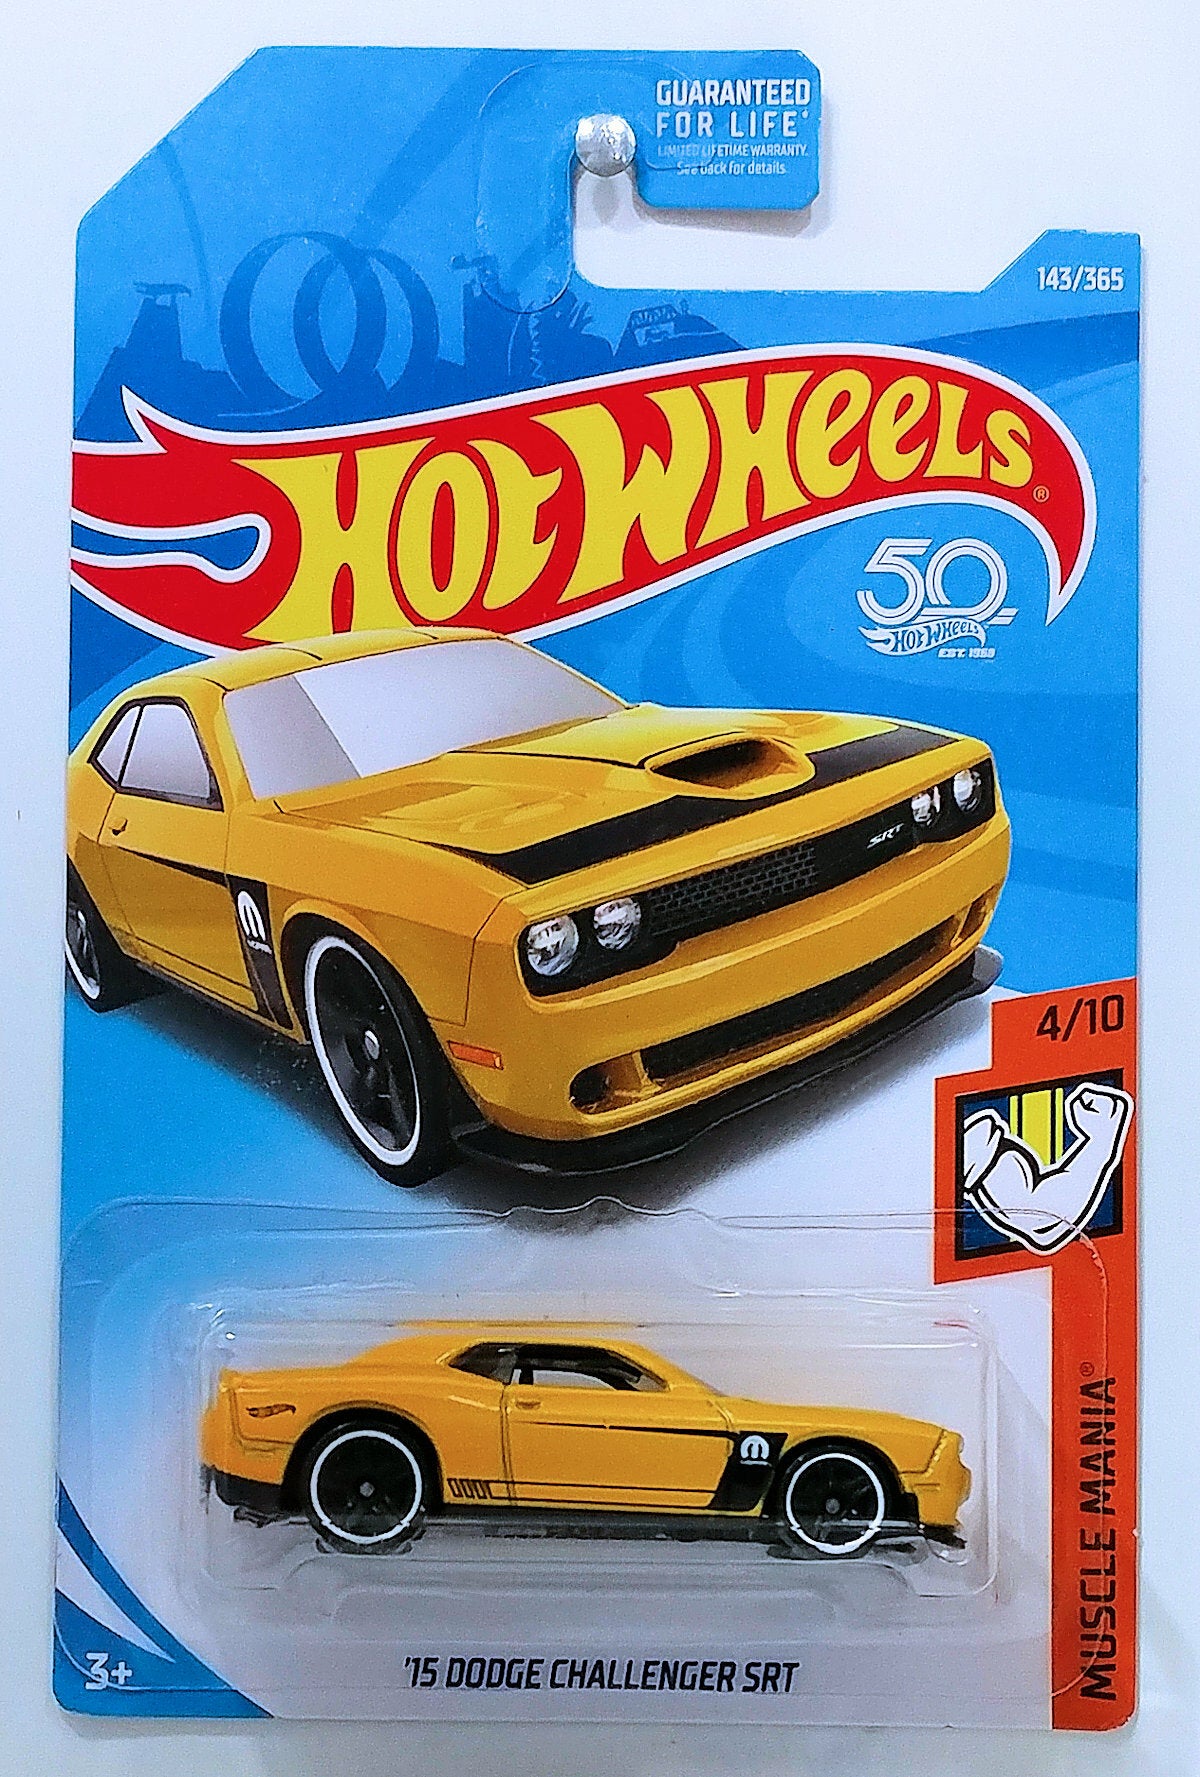 Hot Wheels 2018 - Collector # 143/365 - Muscle Mania 4/10 - '15 Dodge Challenger SRT - Dark Yellow - USA 50th Card